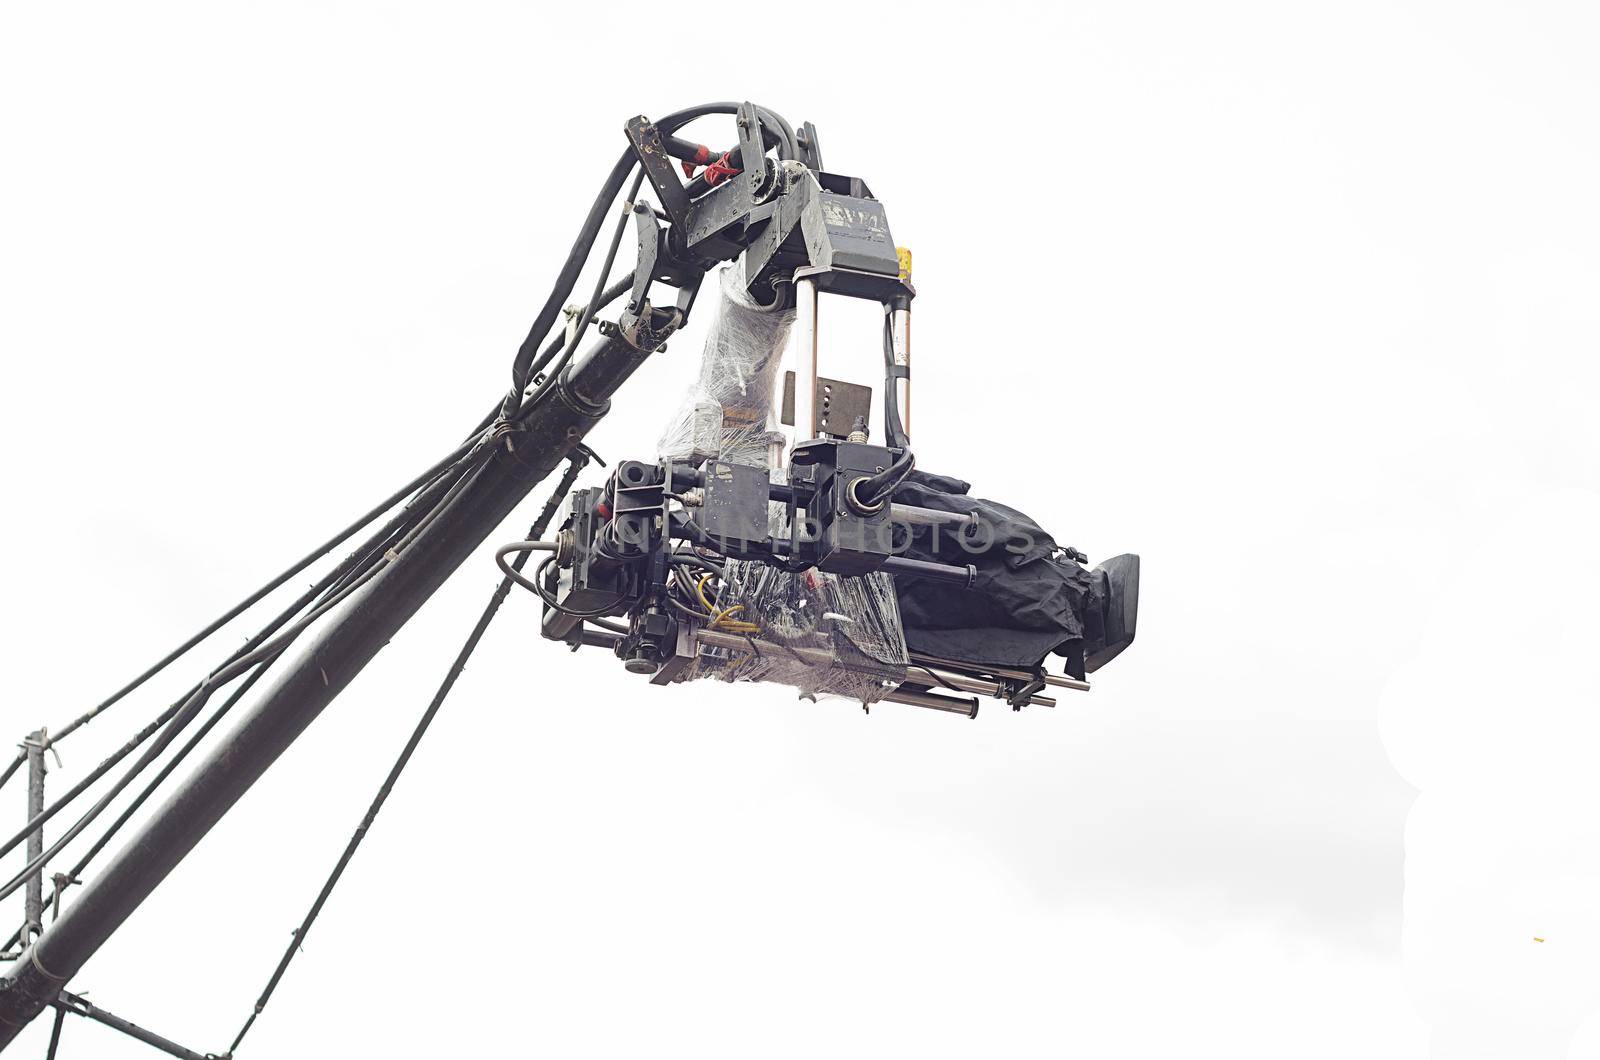 camera on the operator's crane on white background. by andre_dechapelle